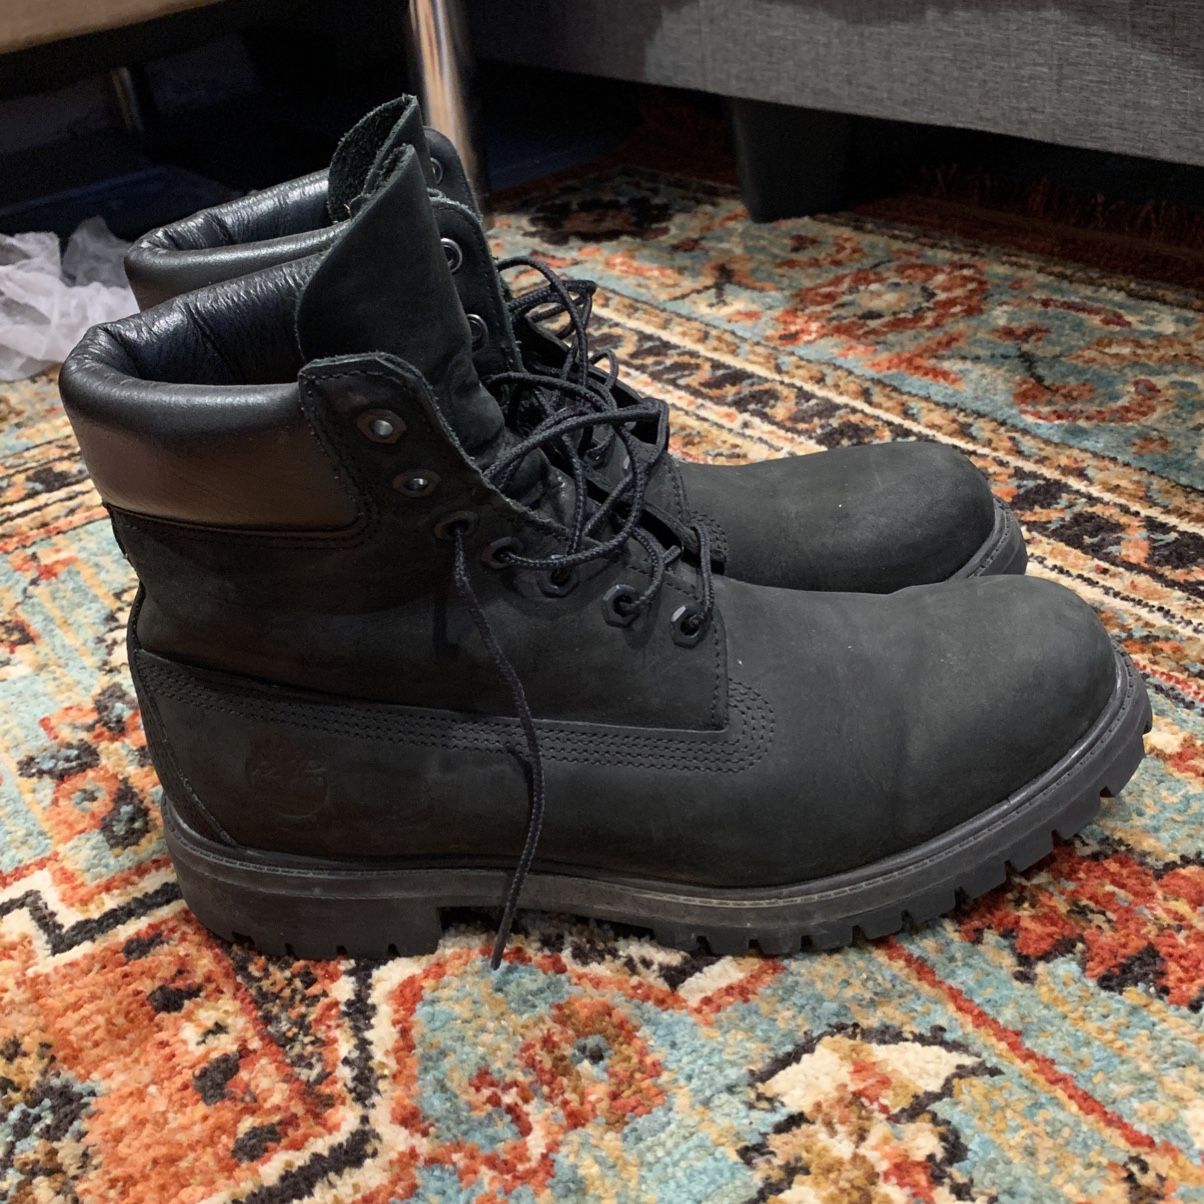 Mens Black 6 Inch Timberland Boots Size 9.5